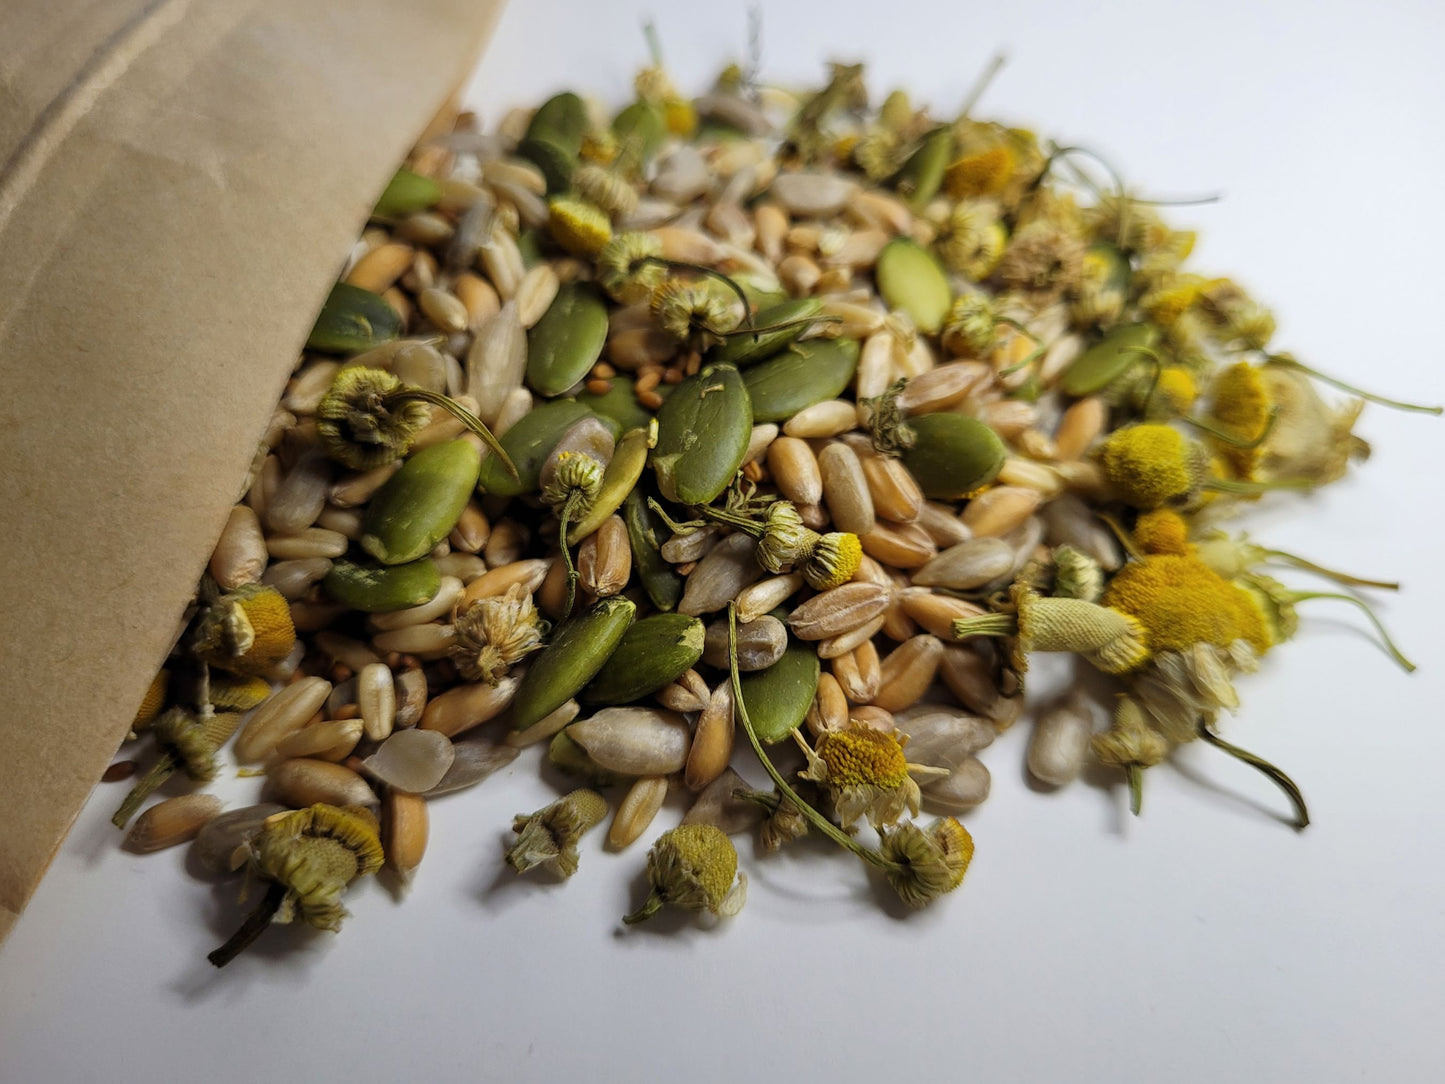 A close up of the chamomile charm crunch showing that it contains chamomile grains and seeds